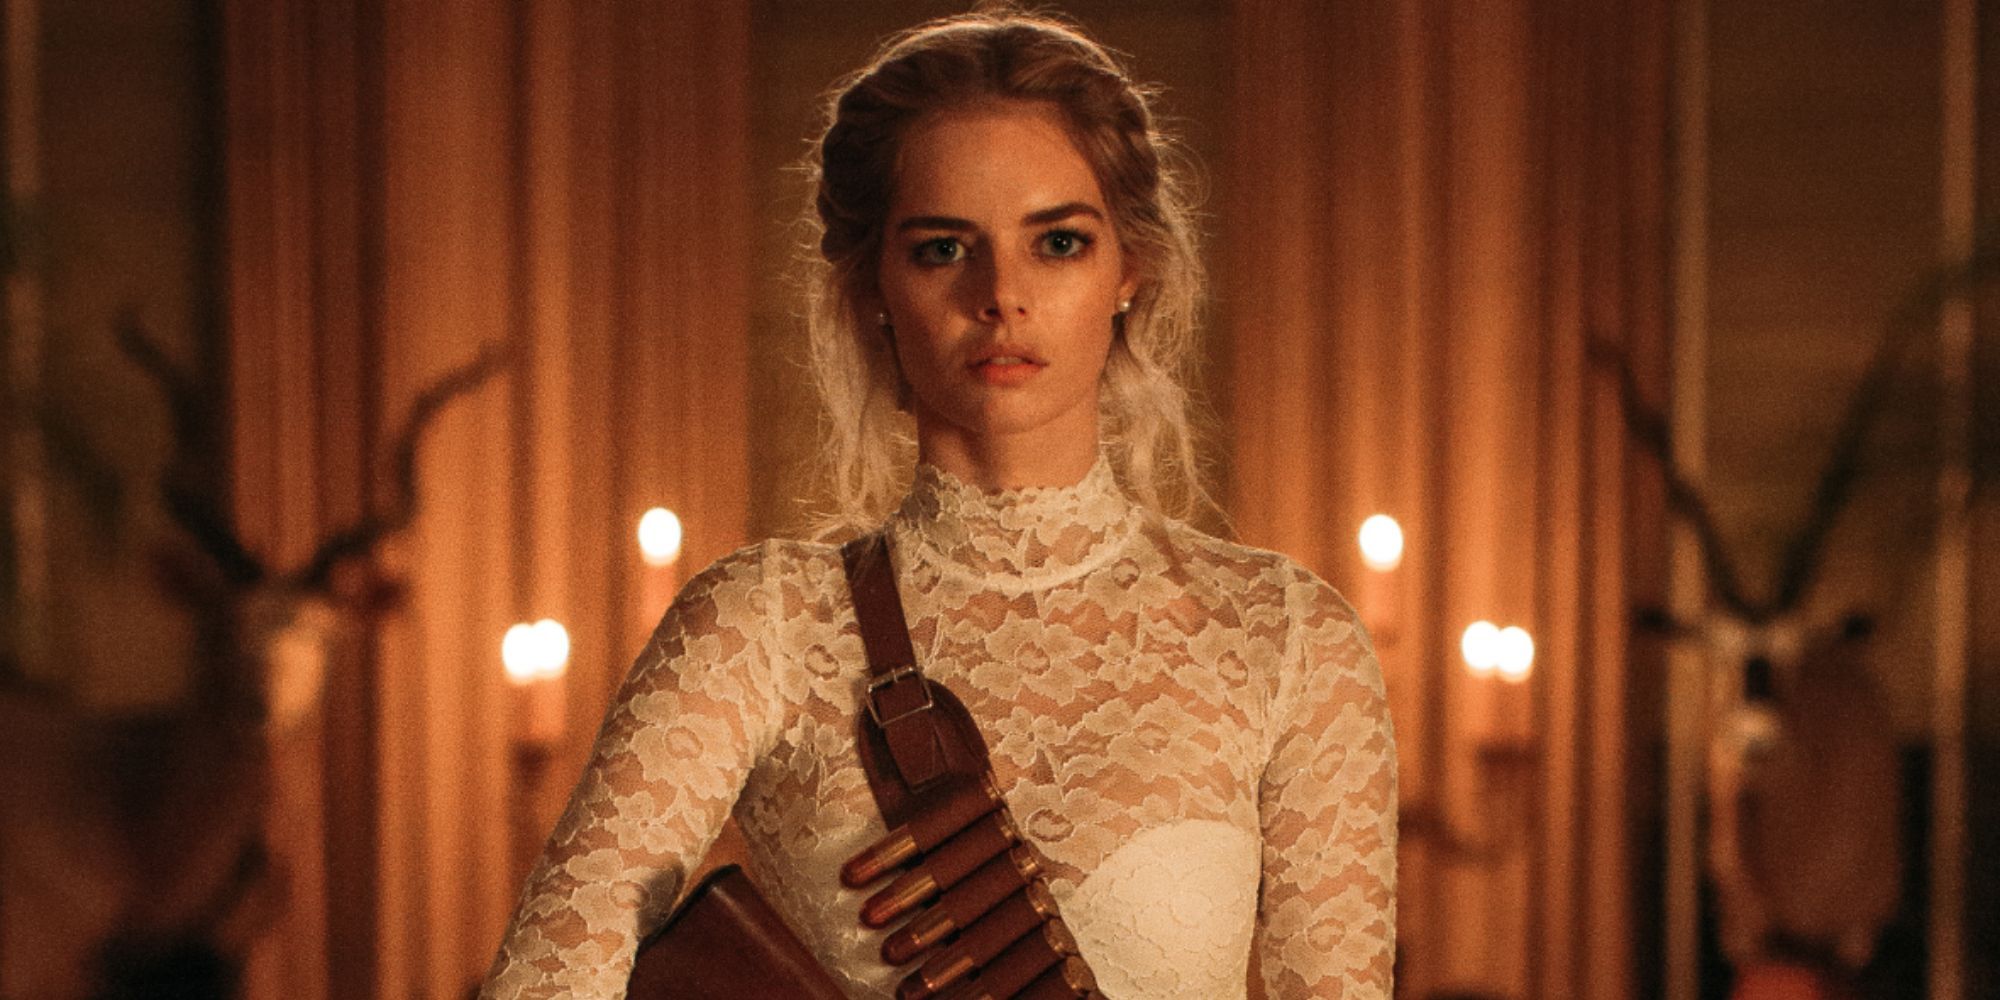 Samara Weaving as Grace wearing a wedidng dress and a bullet sash and holding a gun in Ready or Not